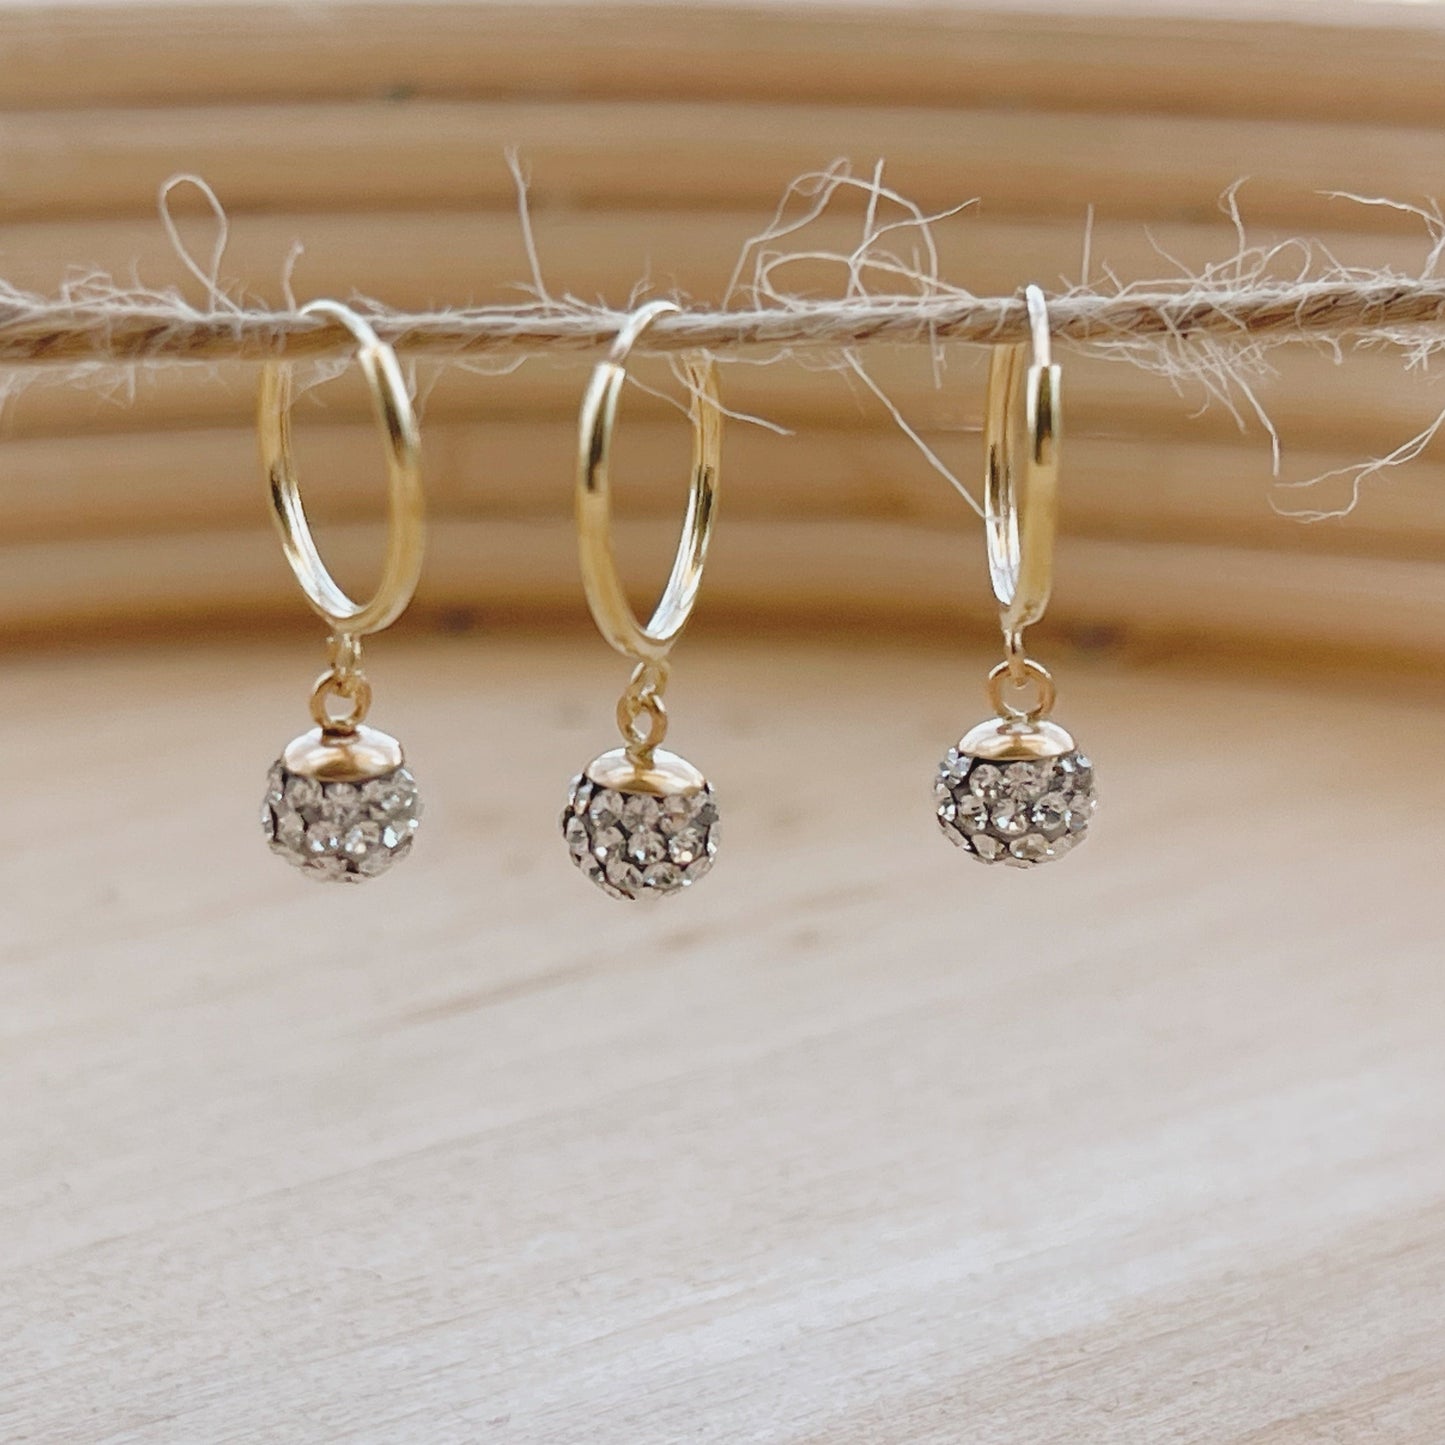 These gold hoop earrings are the perfect minimalist hoop earrings. The sphere shaped hoop is simple, yet eye catching. 